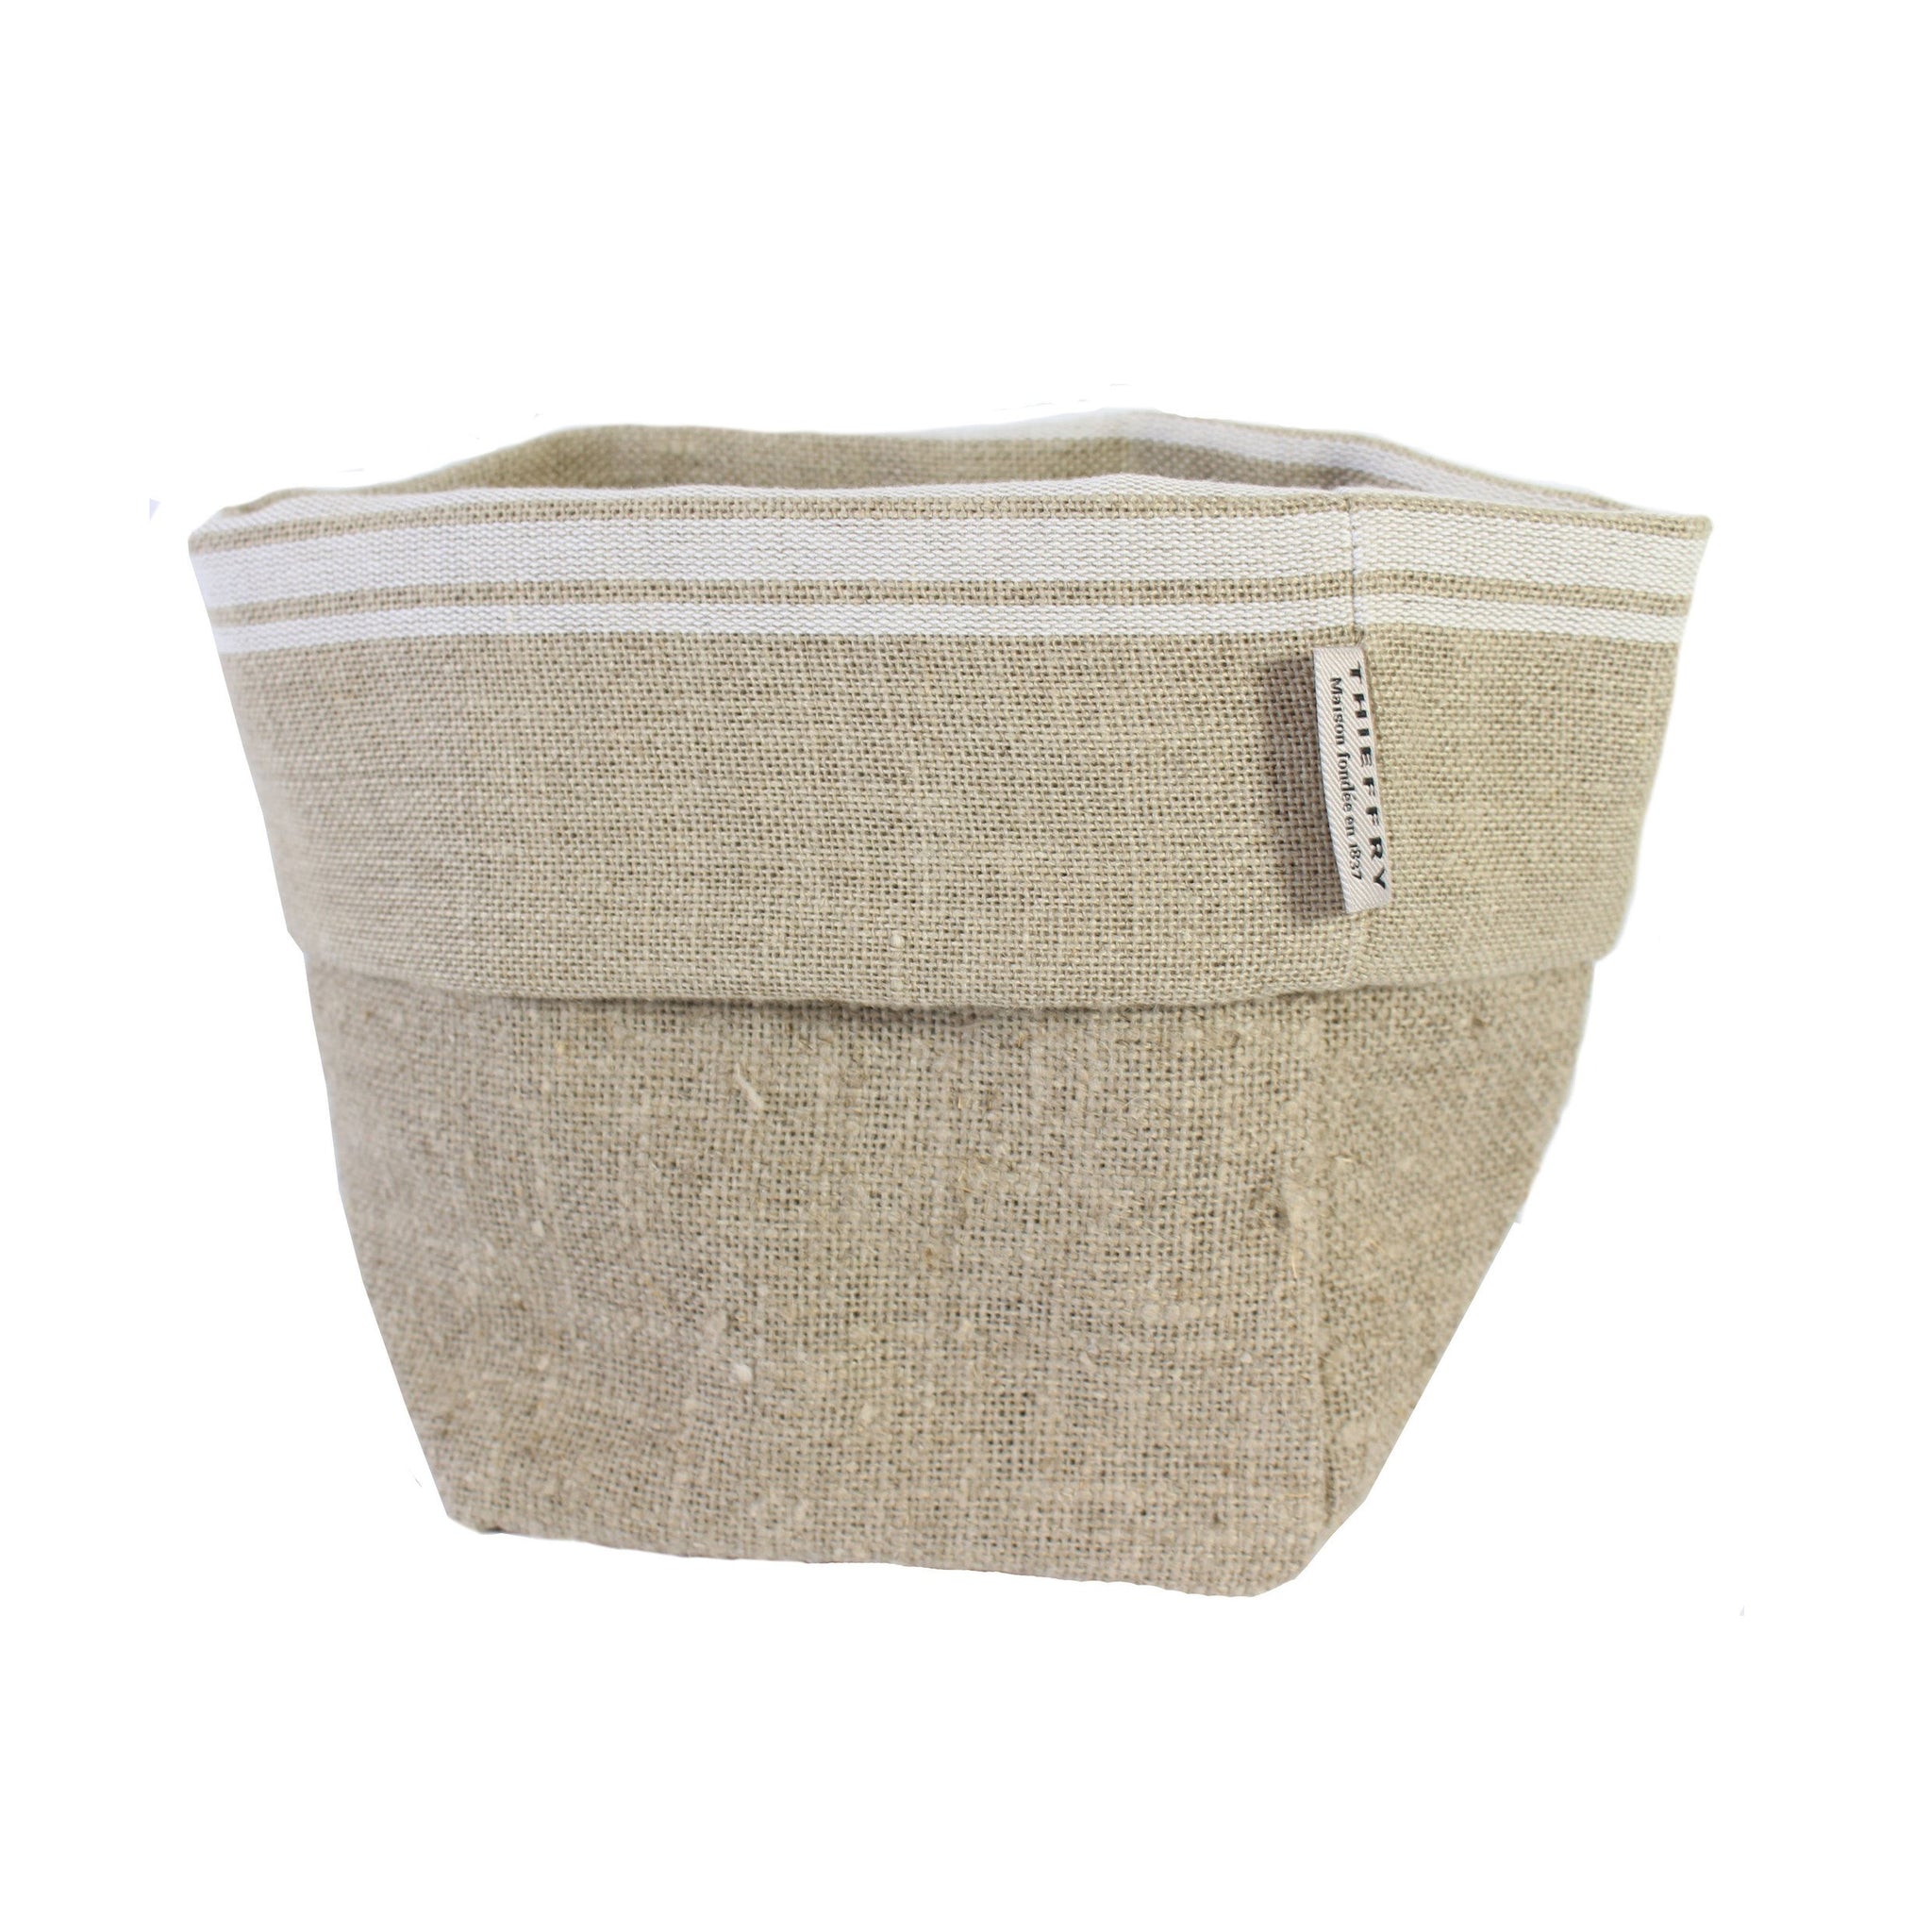 Thieffry White Monogramme Linen Bread Bag - French Dry Goods